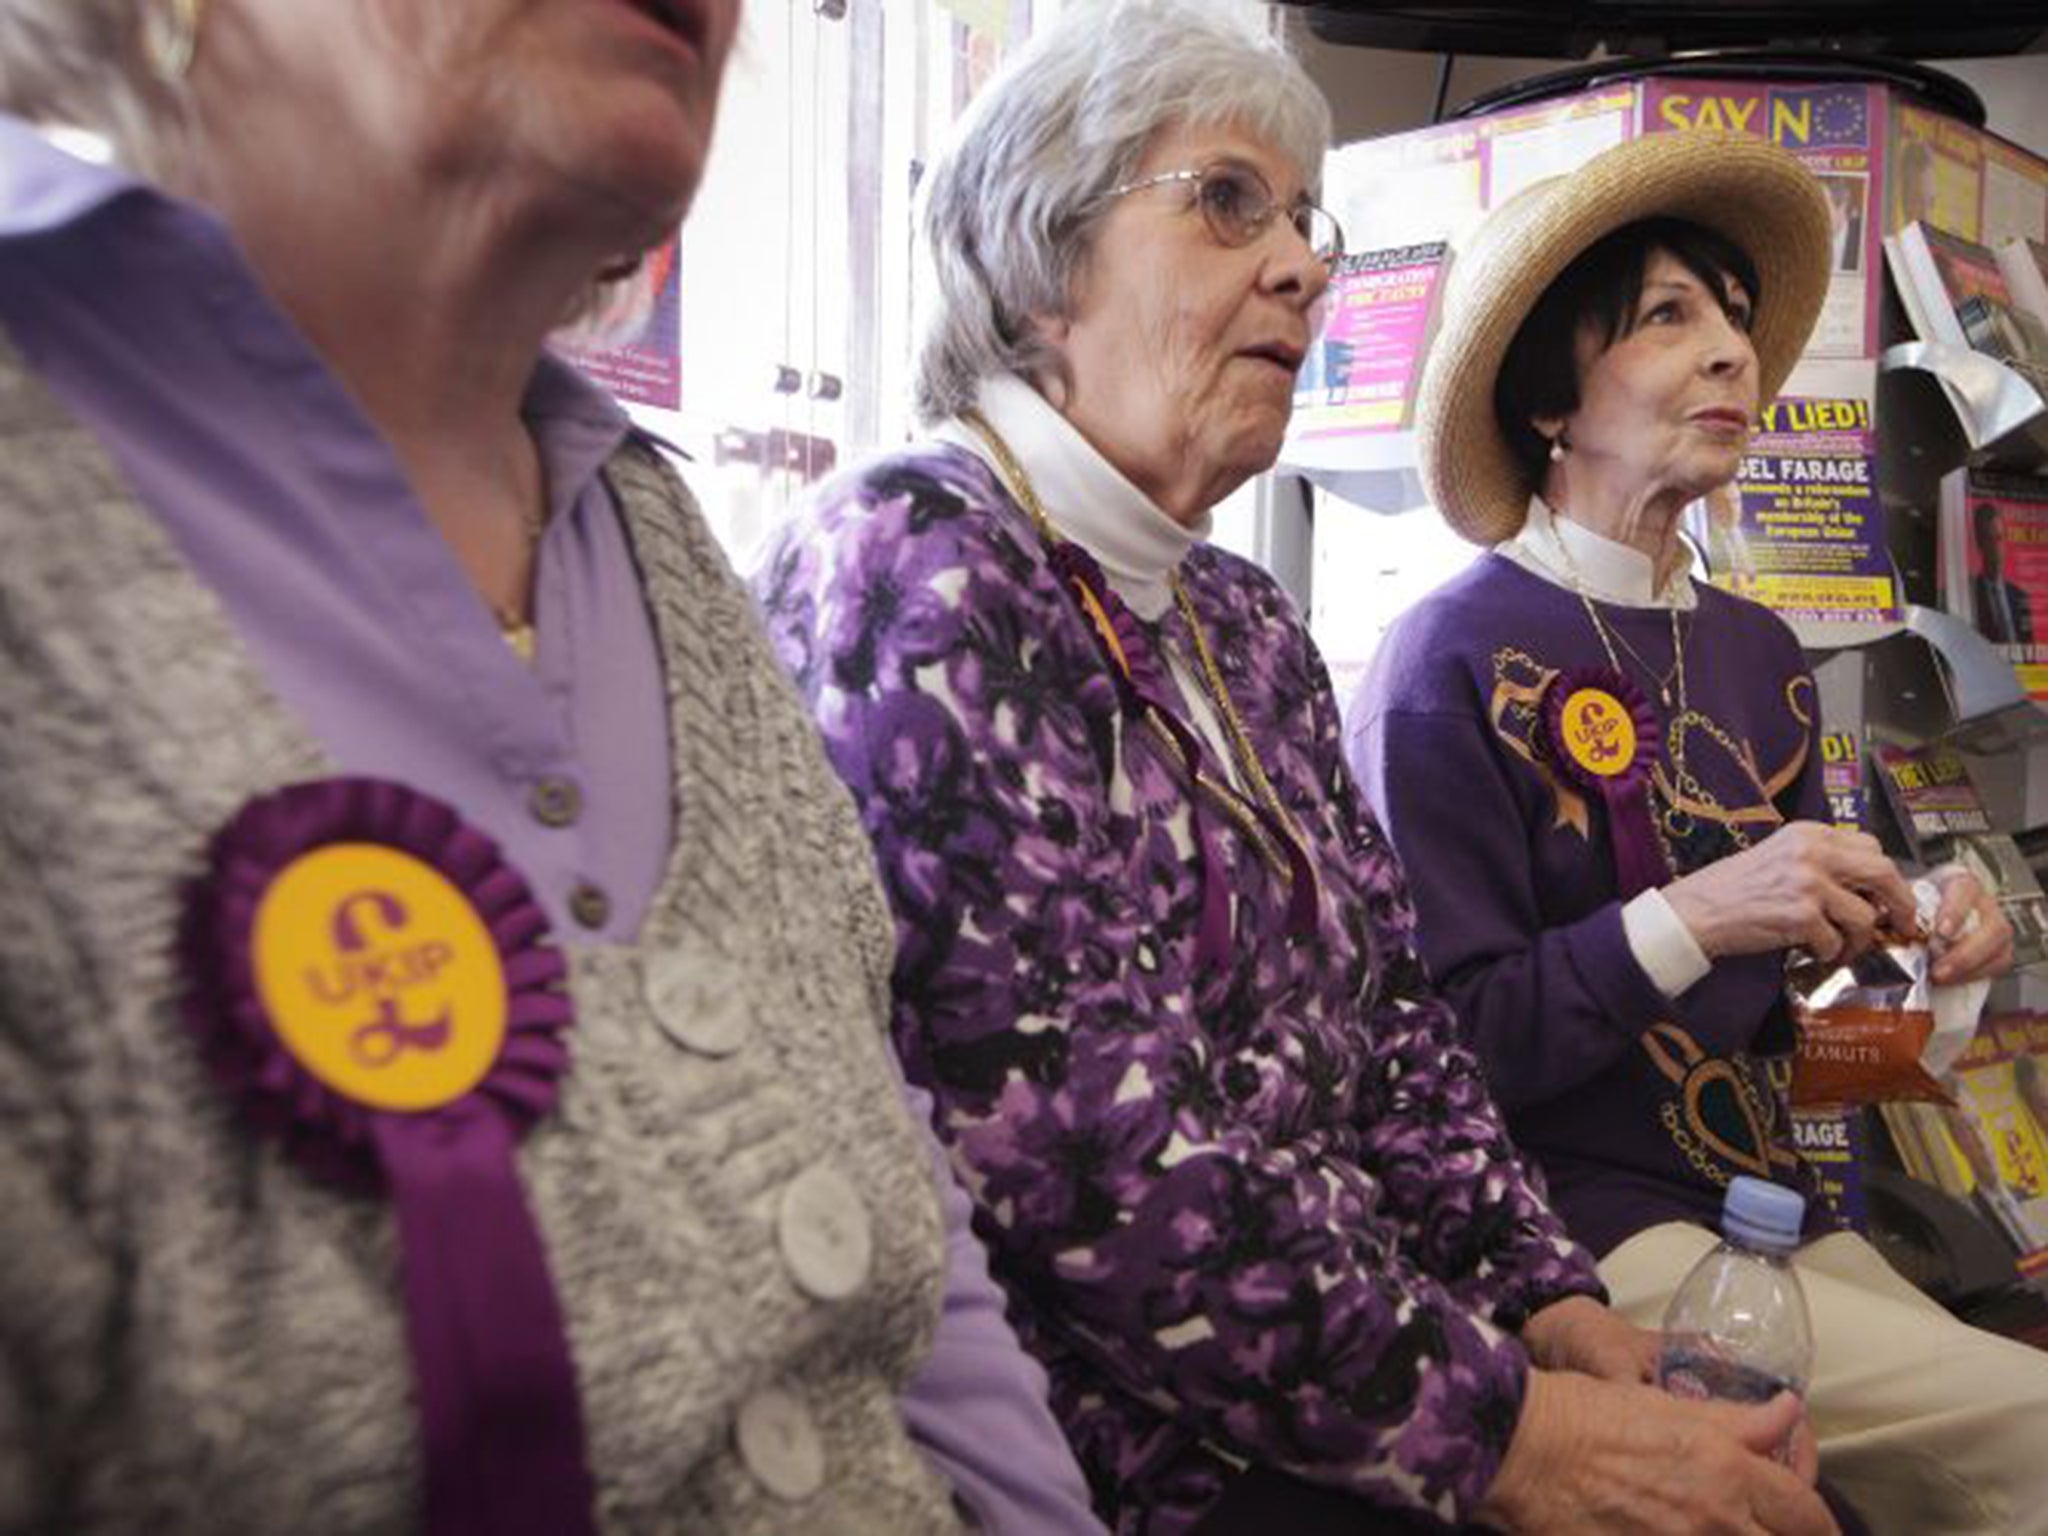 Ukip supporters in Buckingham. The survey also found support was higher among those in working-class occupations